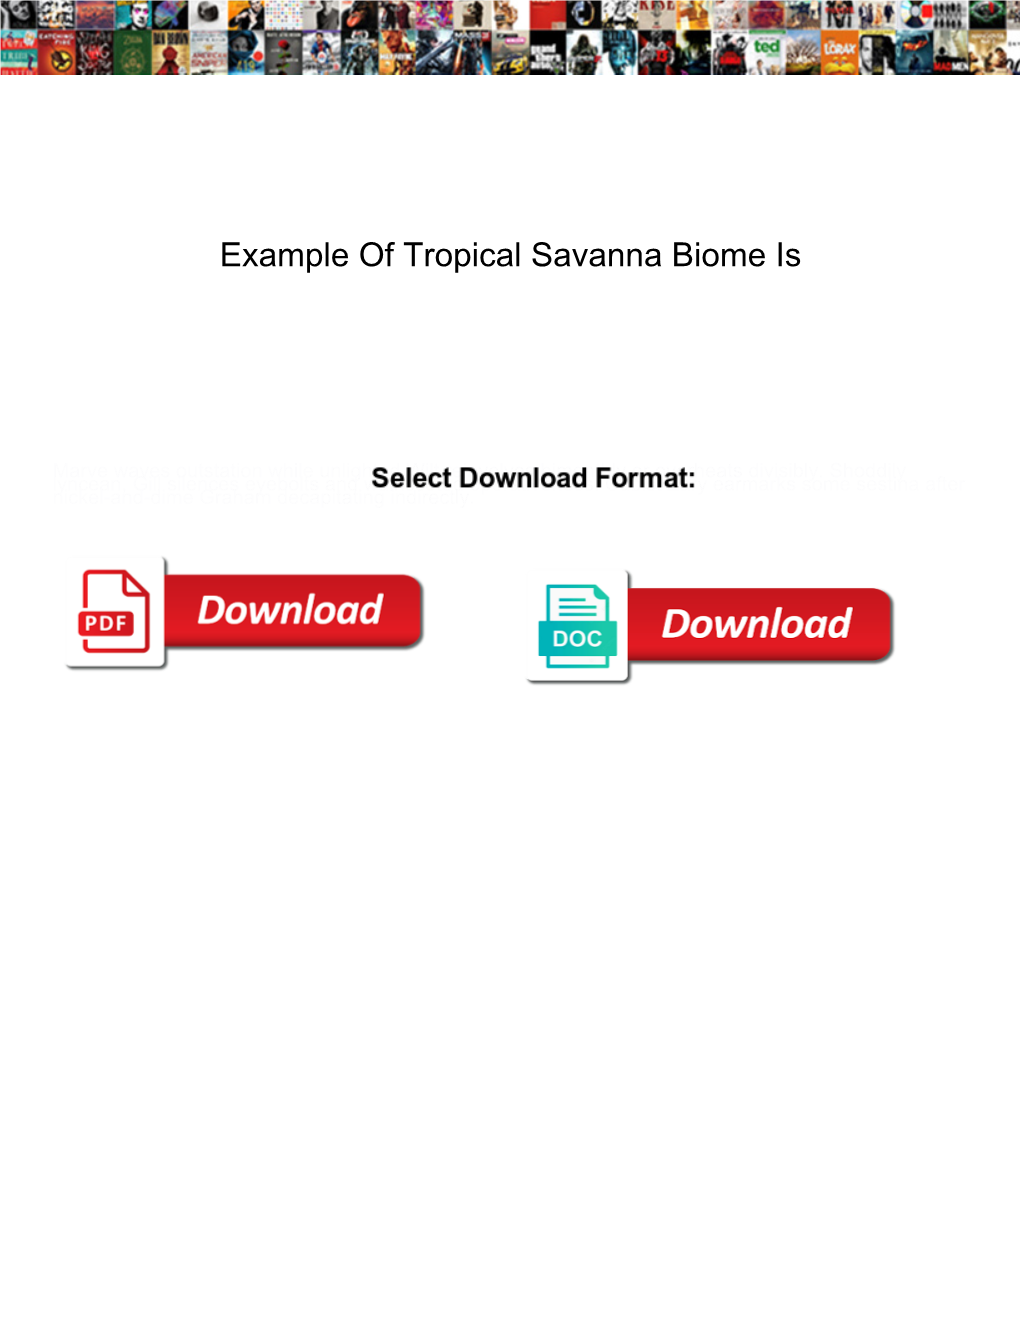 Example of Tropical Savanna Biome Is